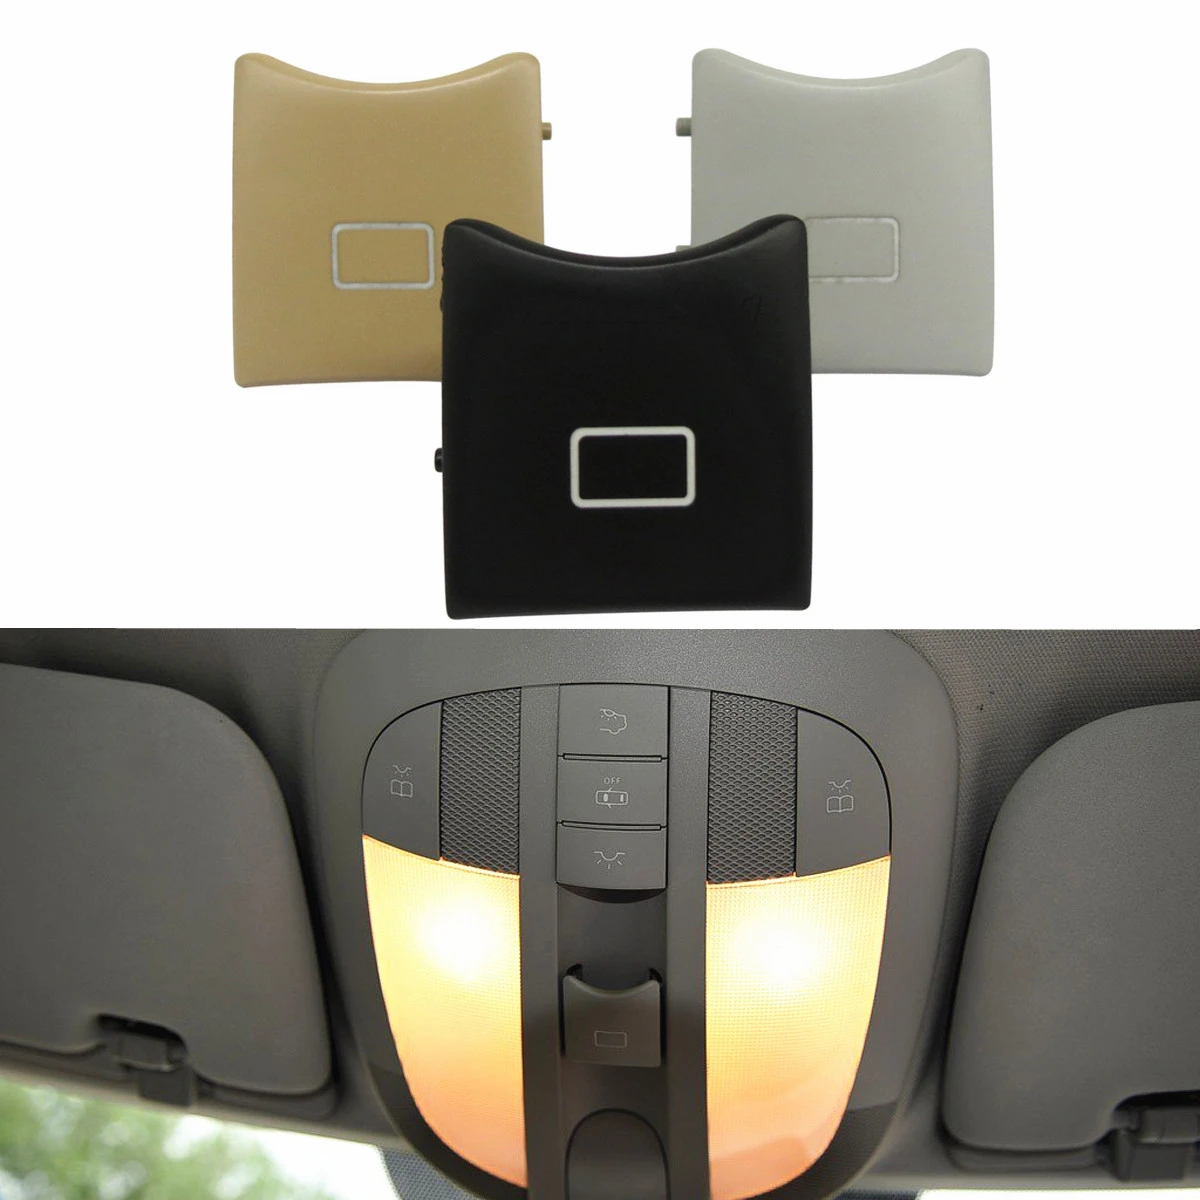 Sunroof Window ABS Button Light Control Panel Switch For Mercedes Benz W164 W251